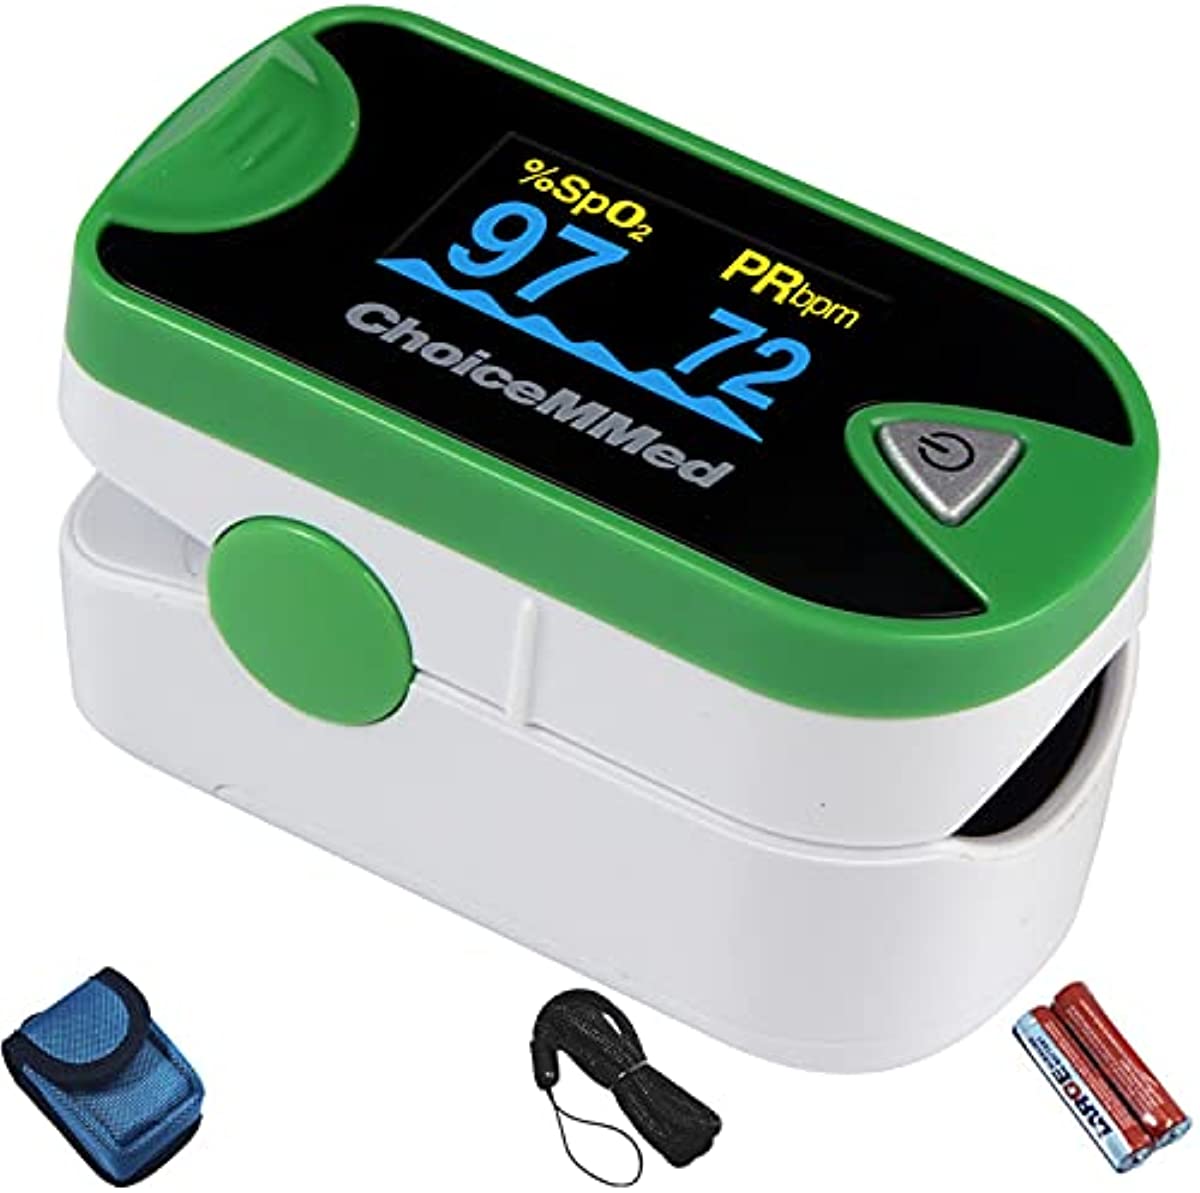 ChoiceMMed Dual Color OLED Finger Pulse Oximeter - Green - Blood Oxygen Saturation Monitor with Color OLED Screen Display and Included Batteries - O2 Saturation Monitor